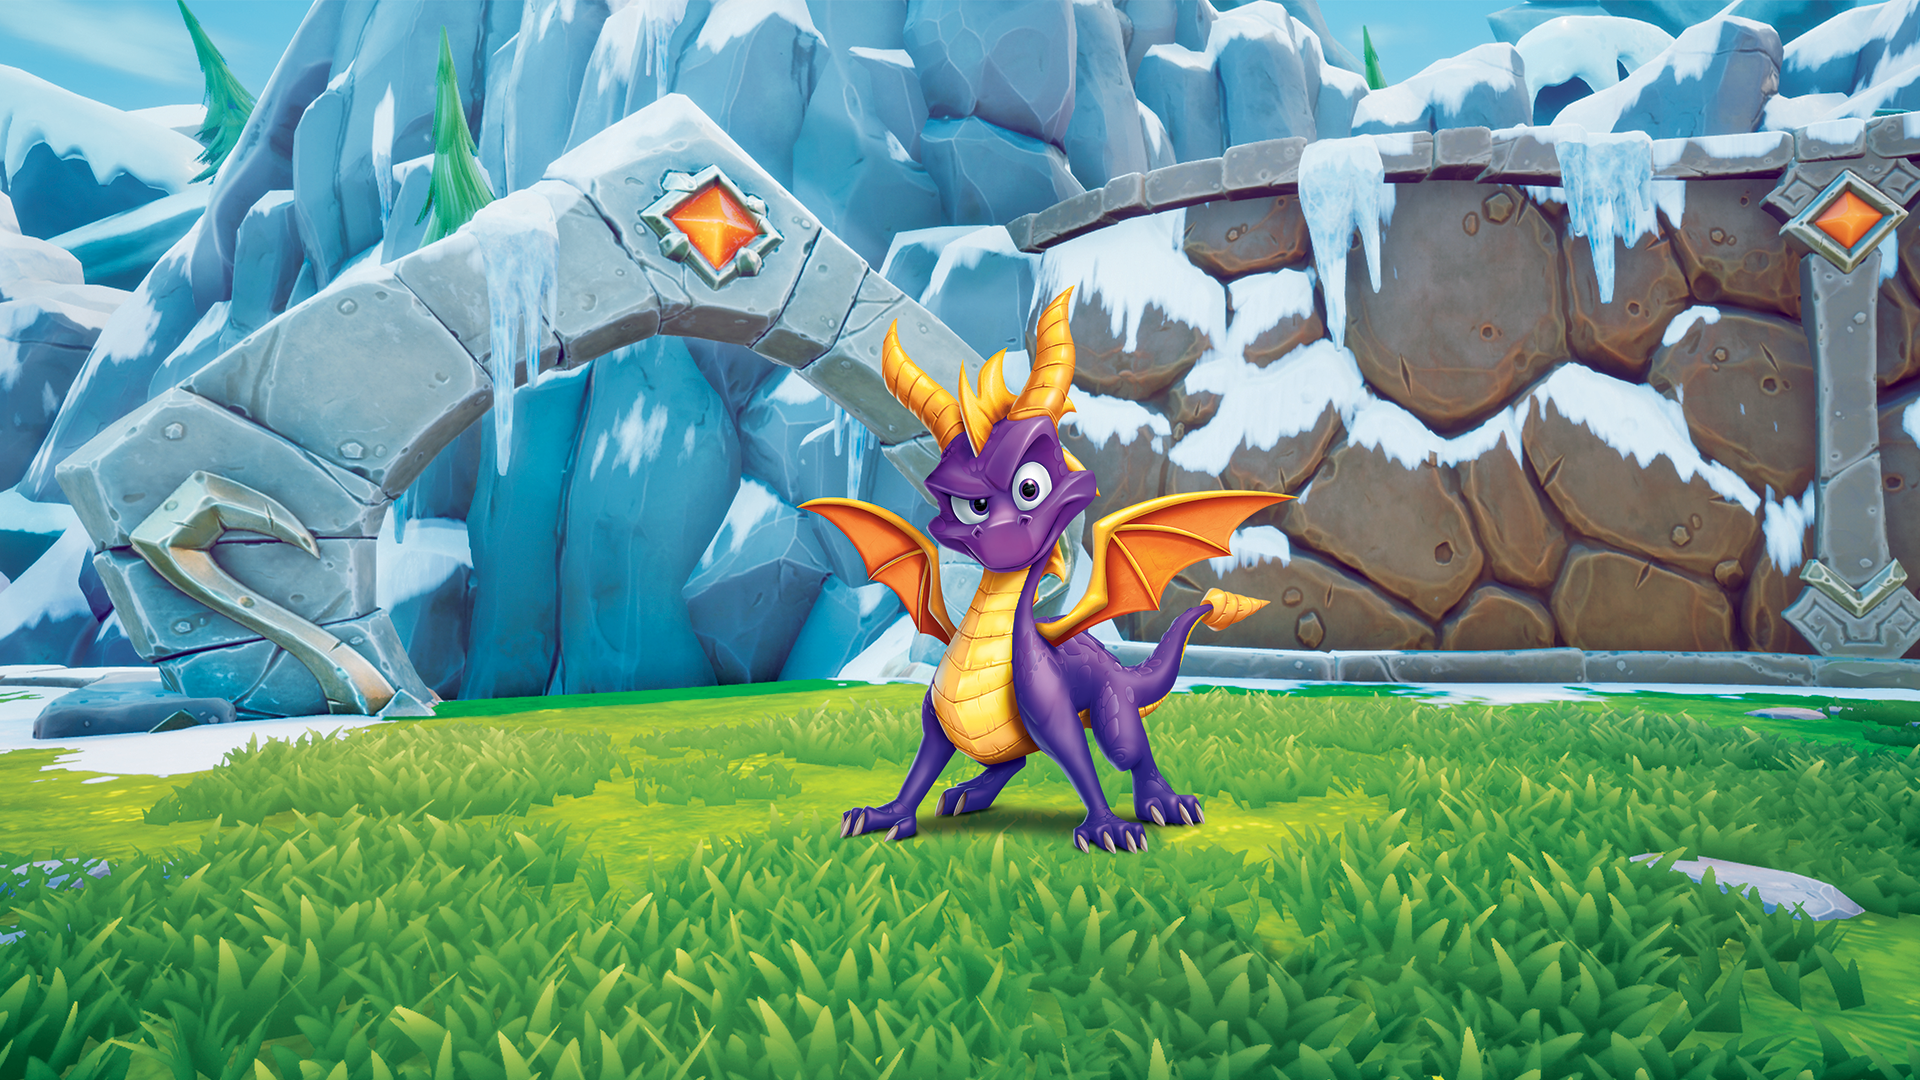 will there be a new spyro game